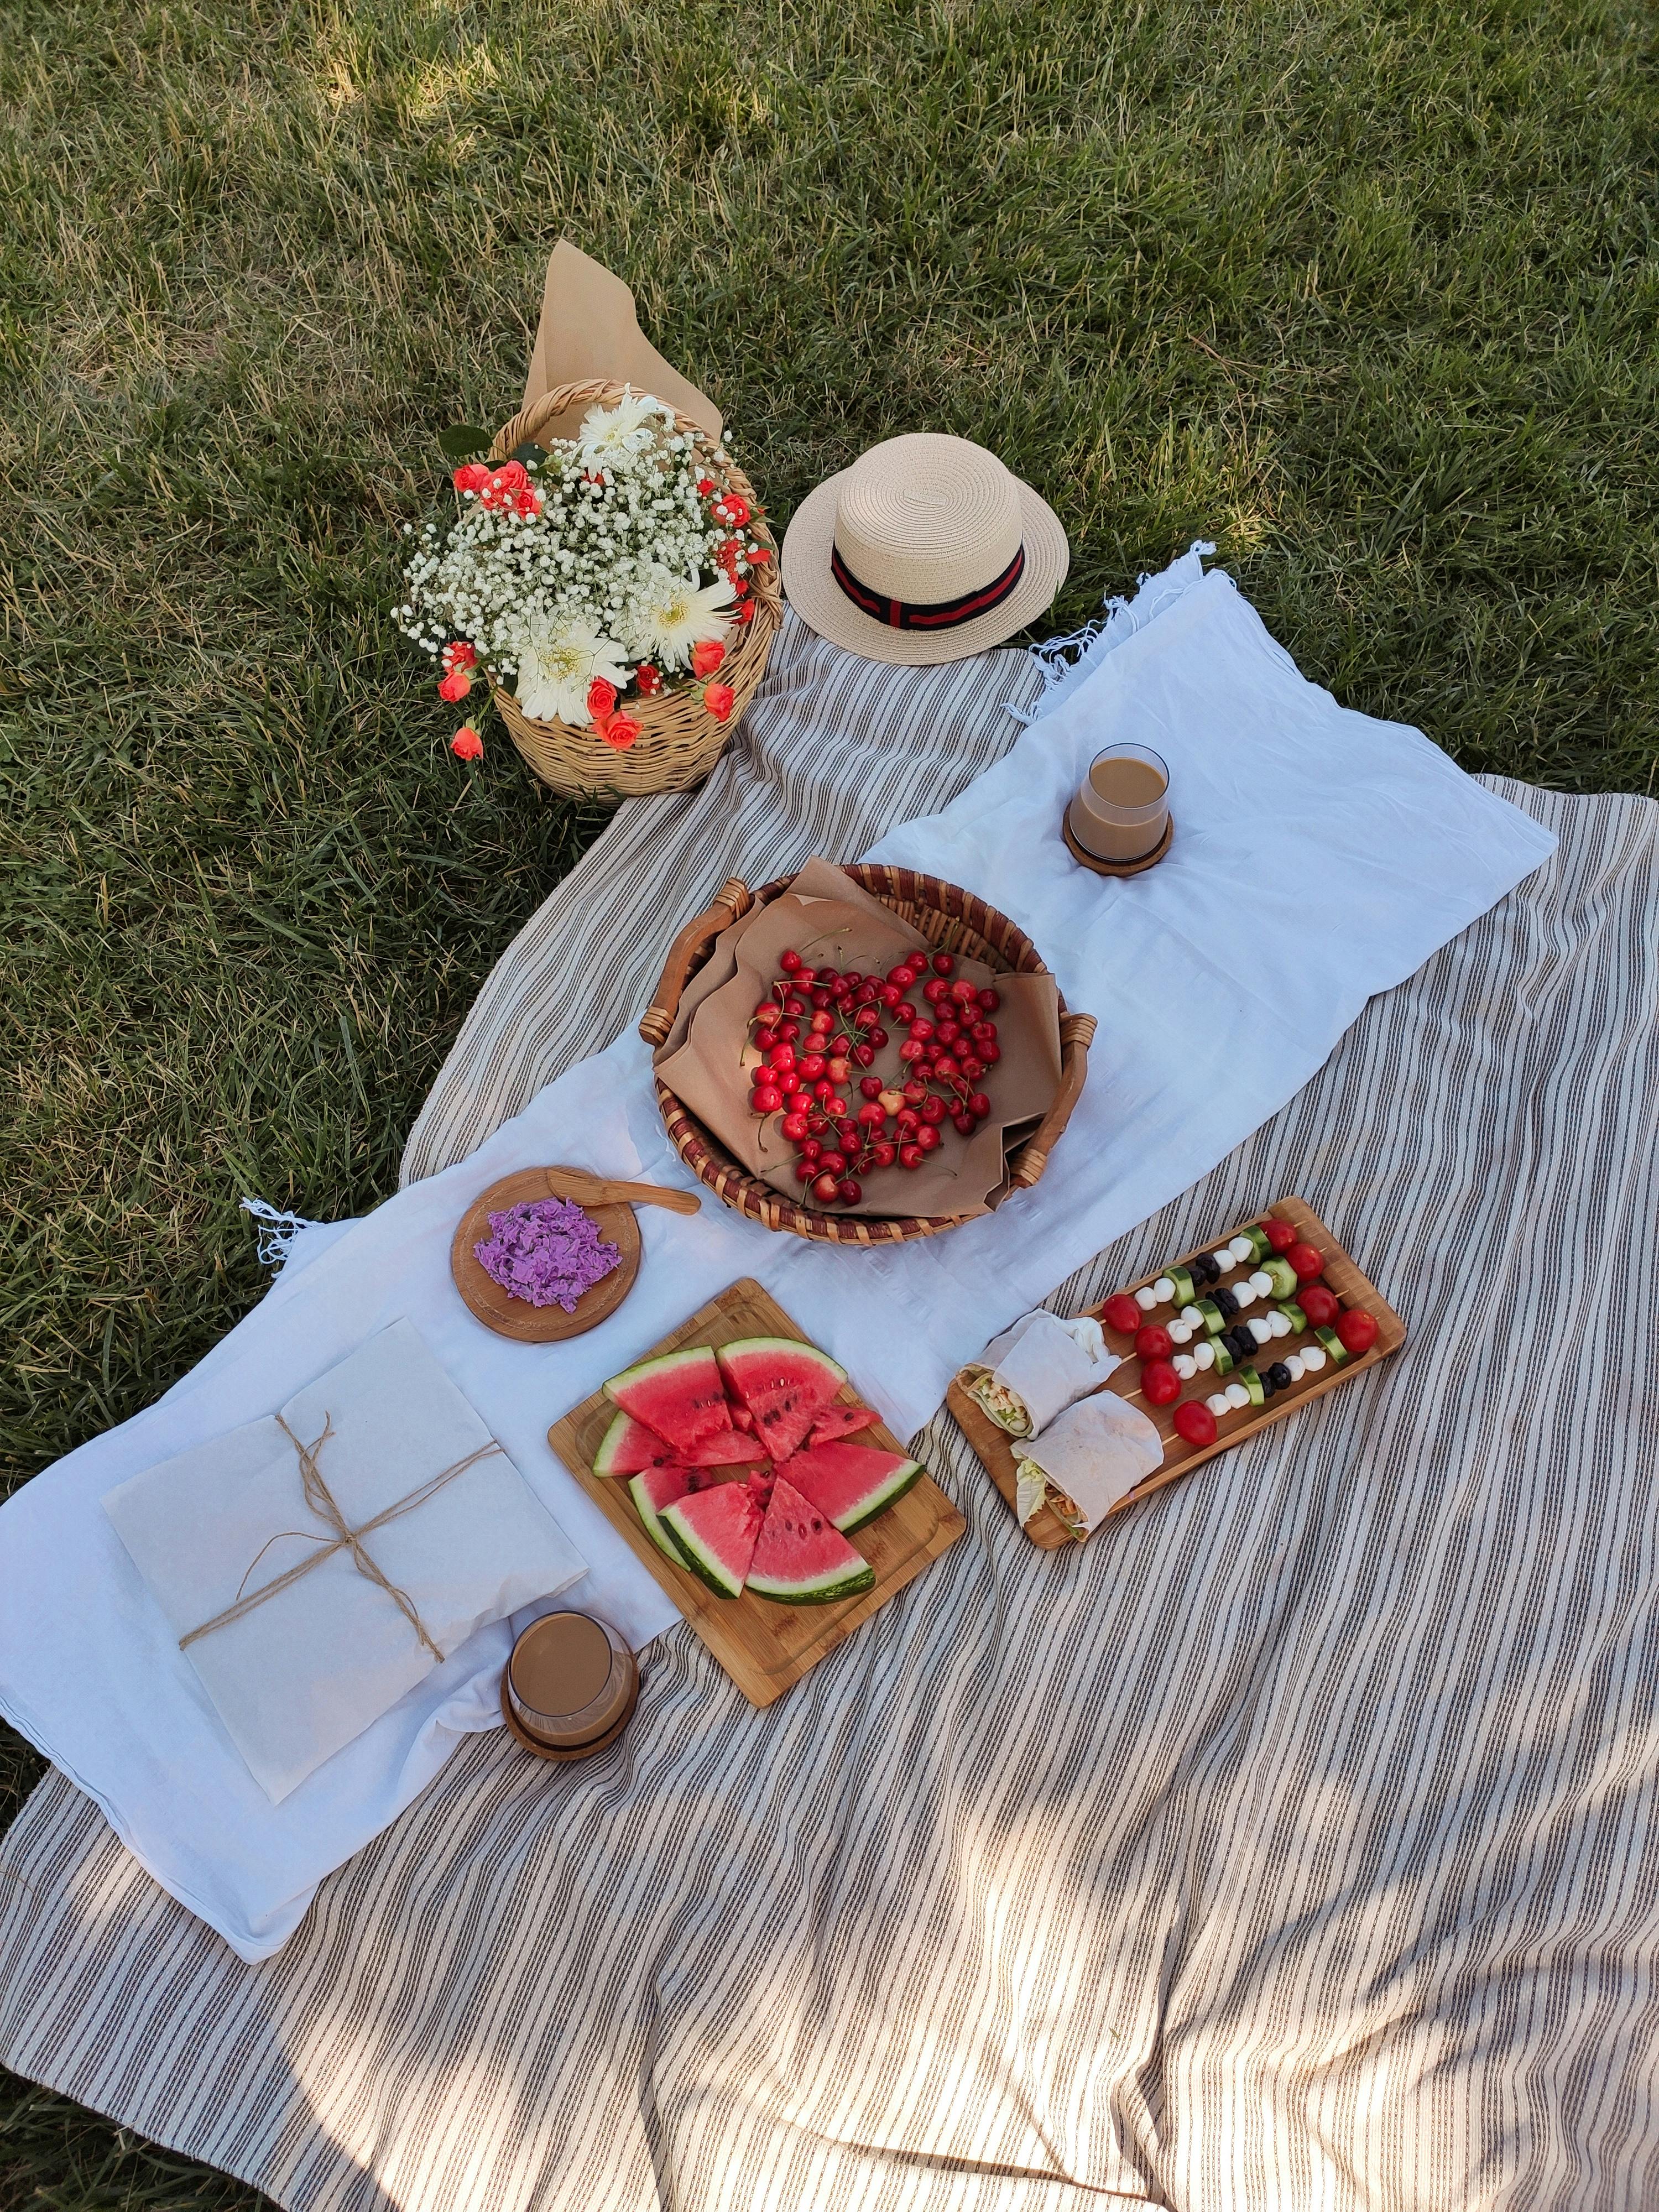 foods over a picnic blanket